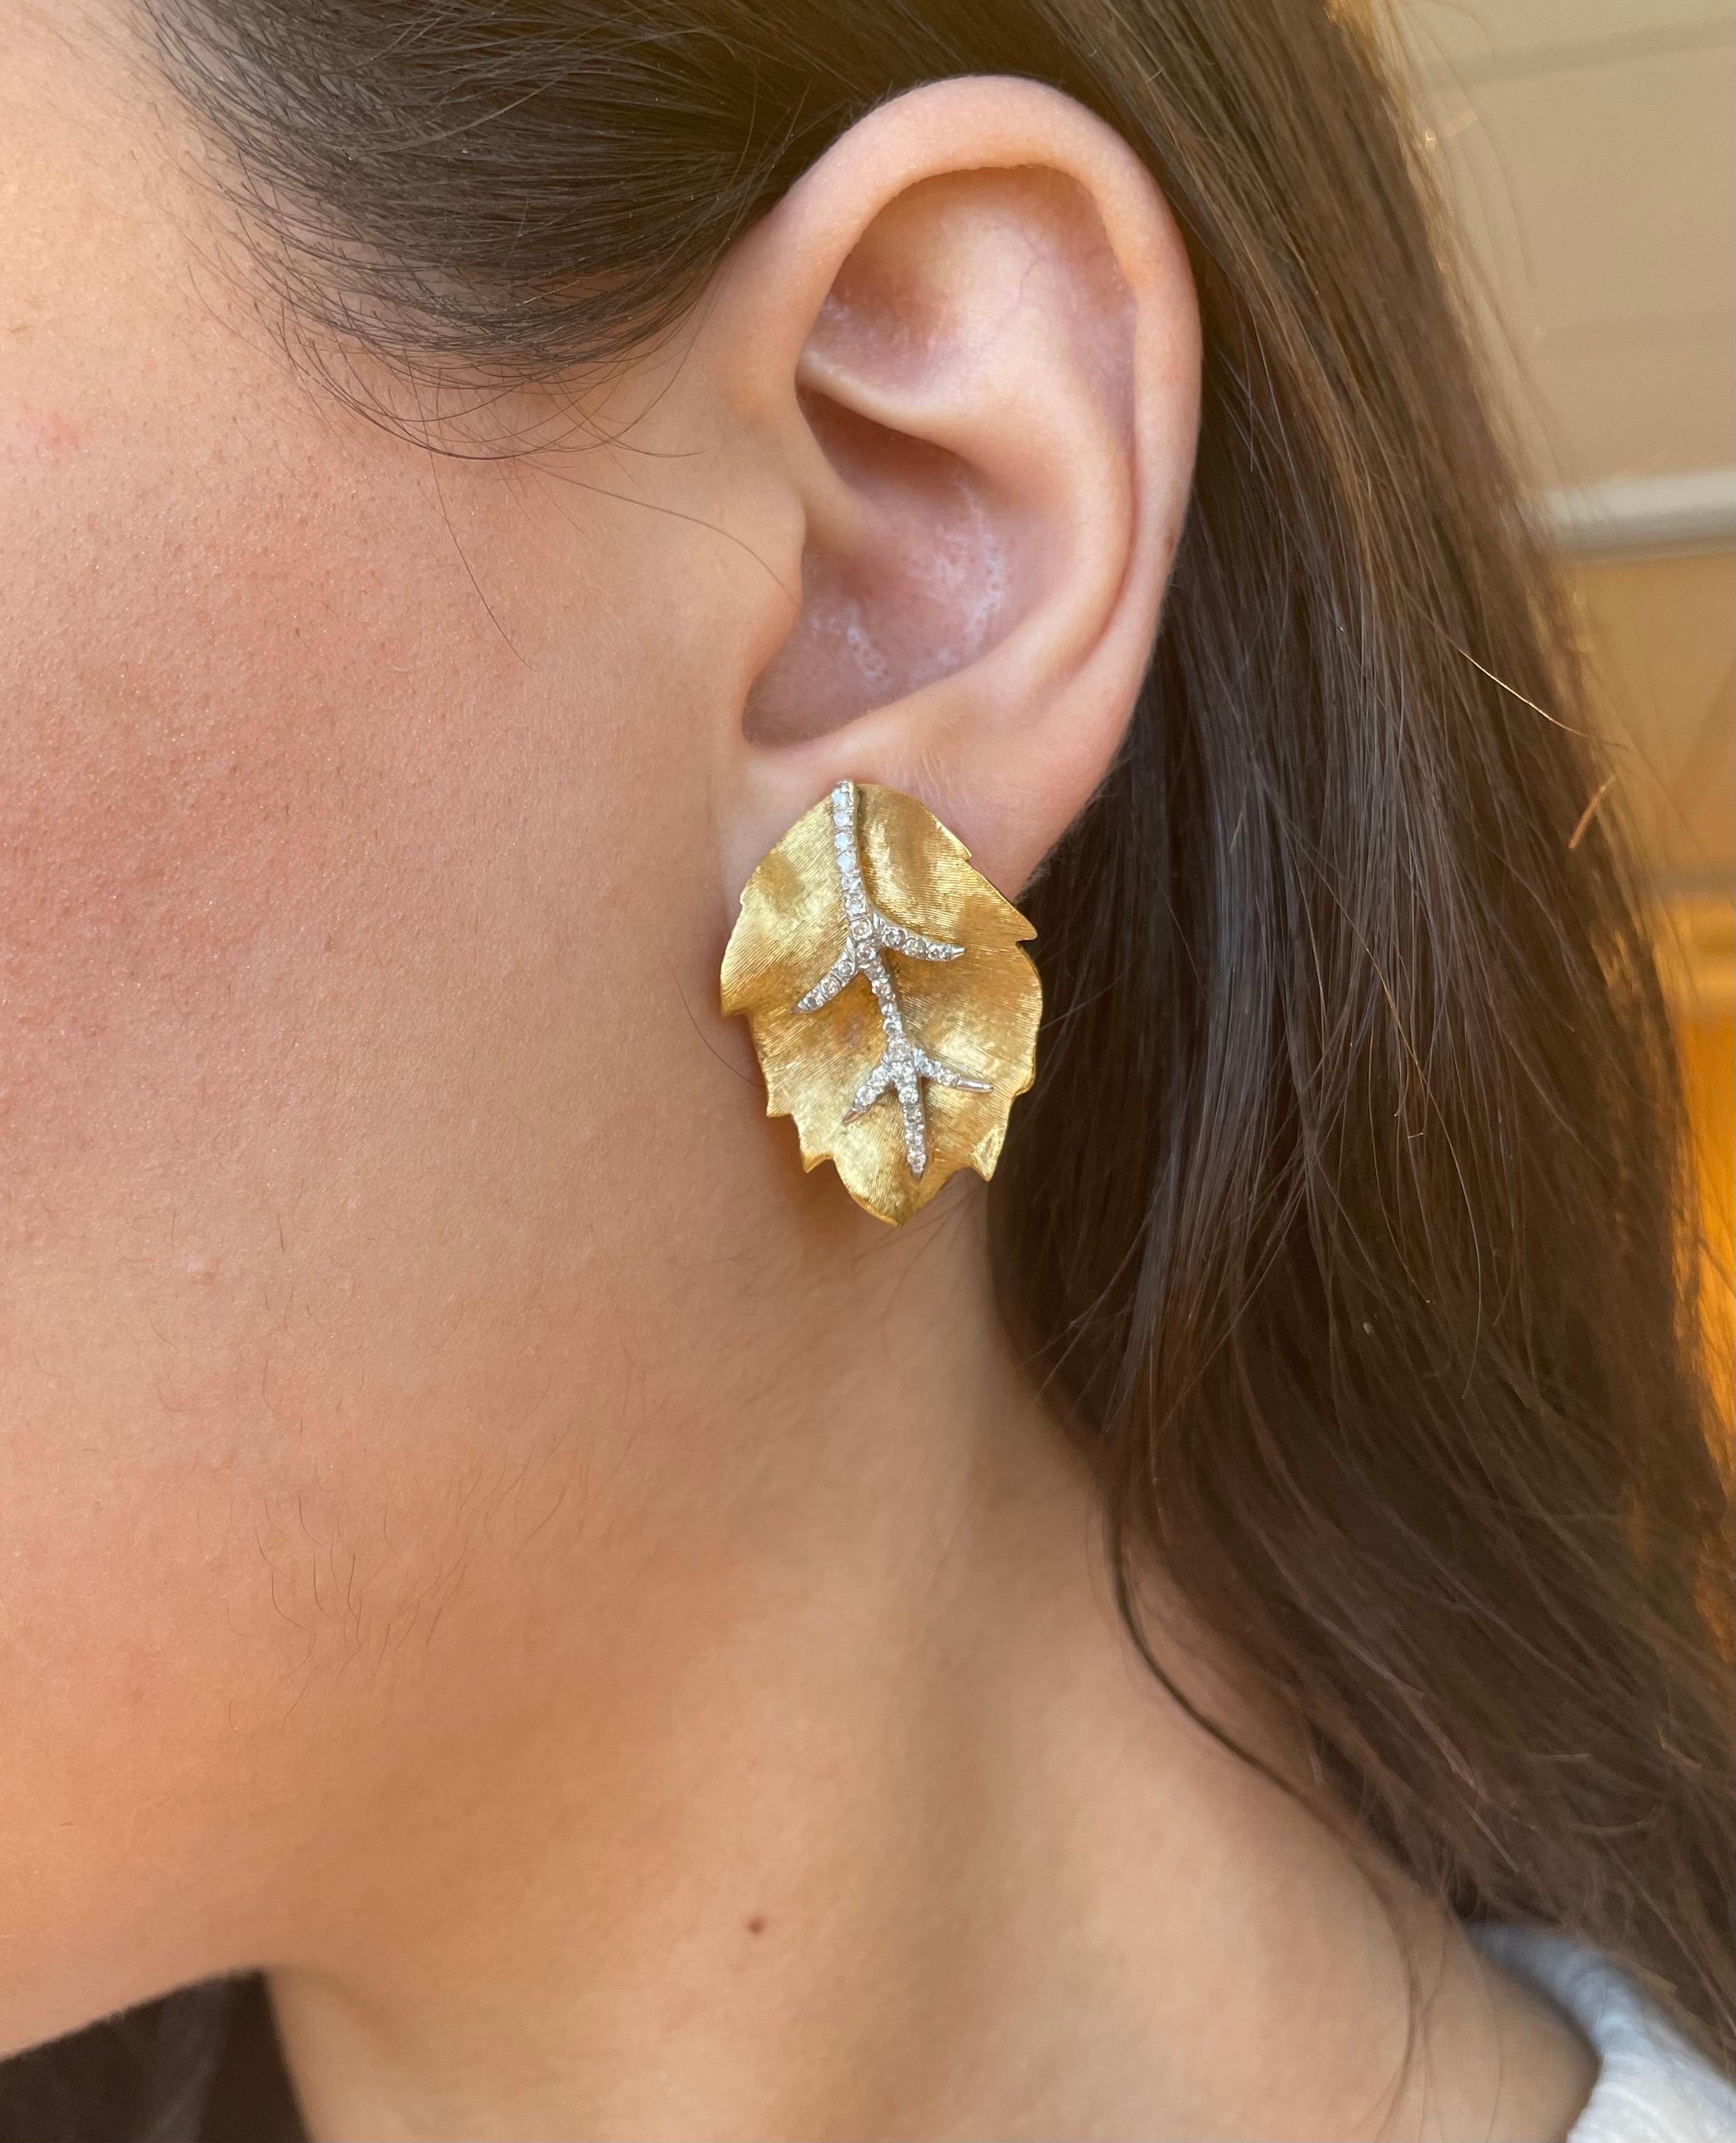 Lovely leaf motif diamond and two tone gold earrings, hand made.
56 round brilliant diamonds approximately 0.70 carats total, H/I color and SI clarity. 18k yellow & white gold.
Accommodated with an up-to-date digital appraisal by a GIA G.G. once